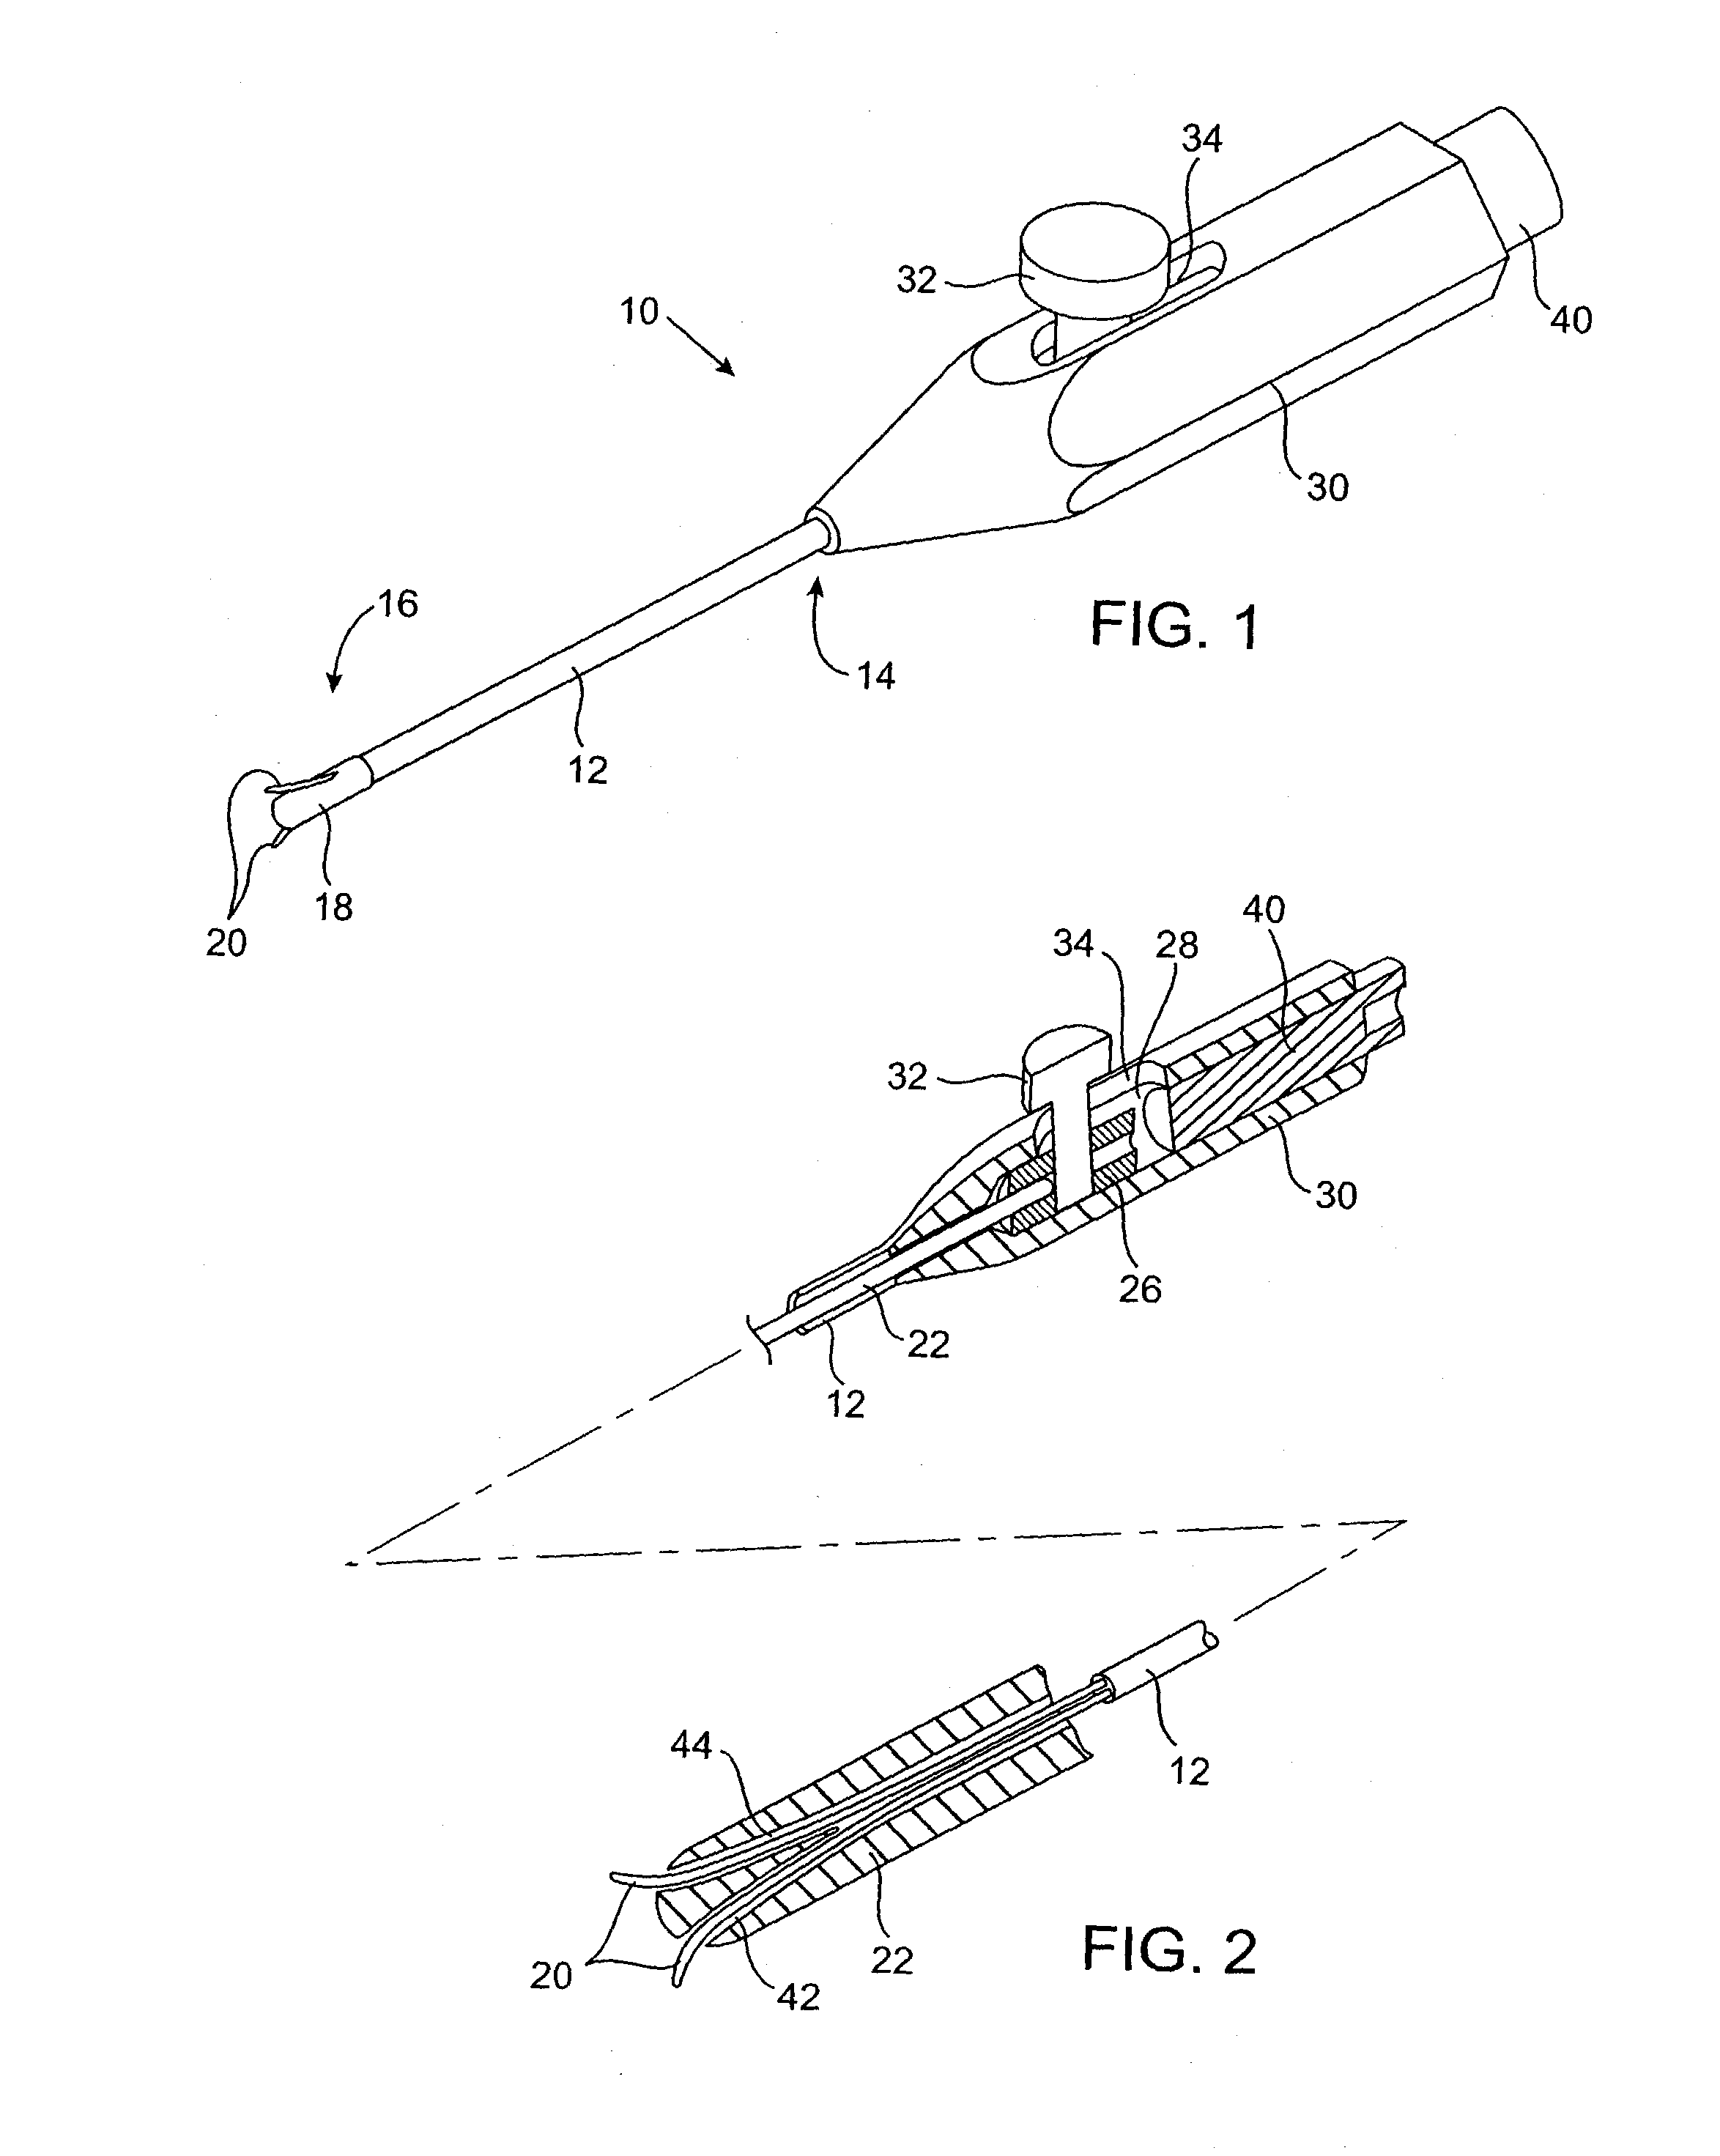 Method and apparatus for avulsion of varicose veins